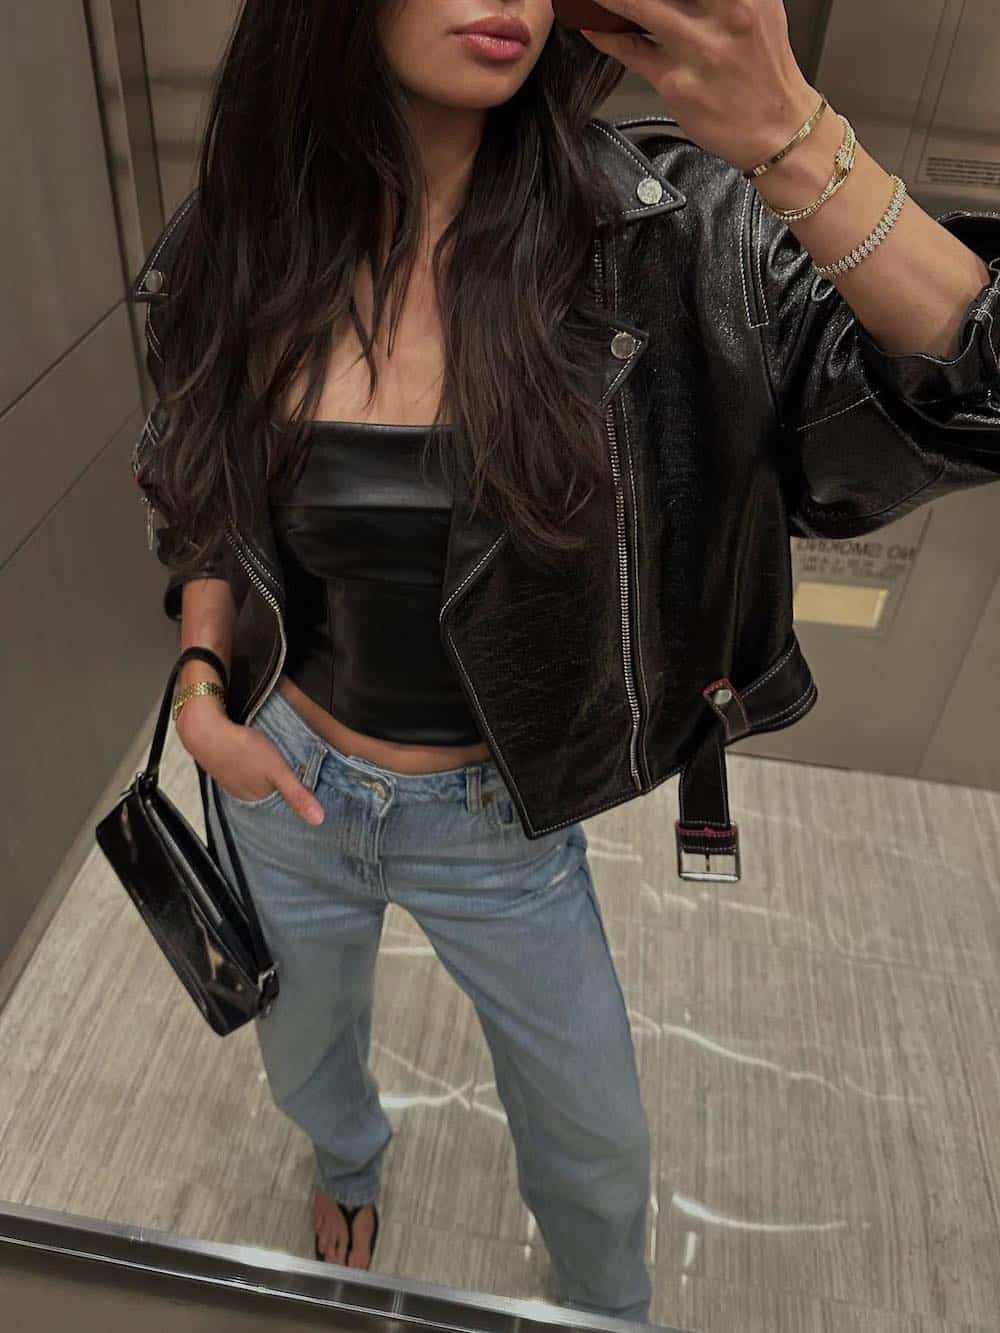 Woman wearing jeans, a black corset top and a black leather jacket.